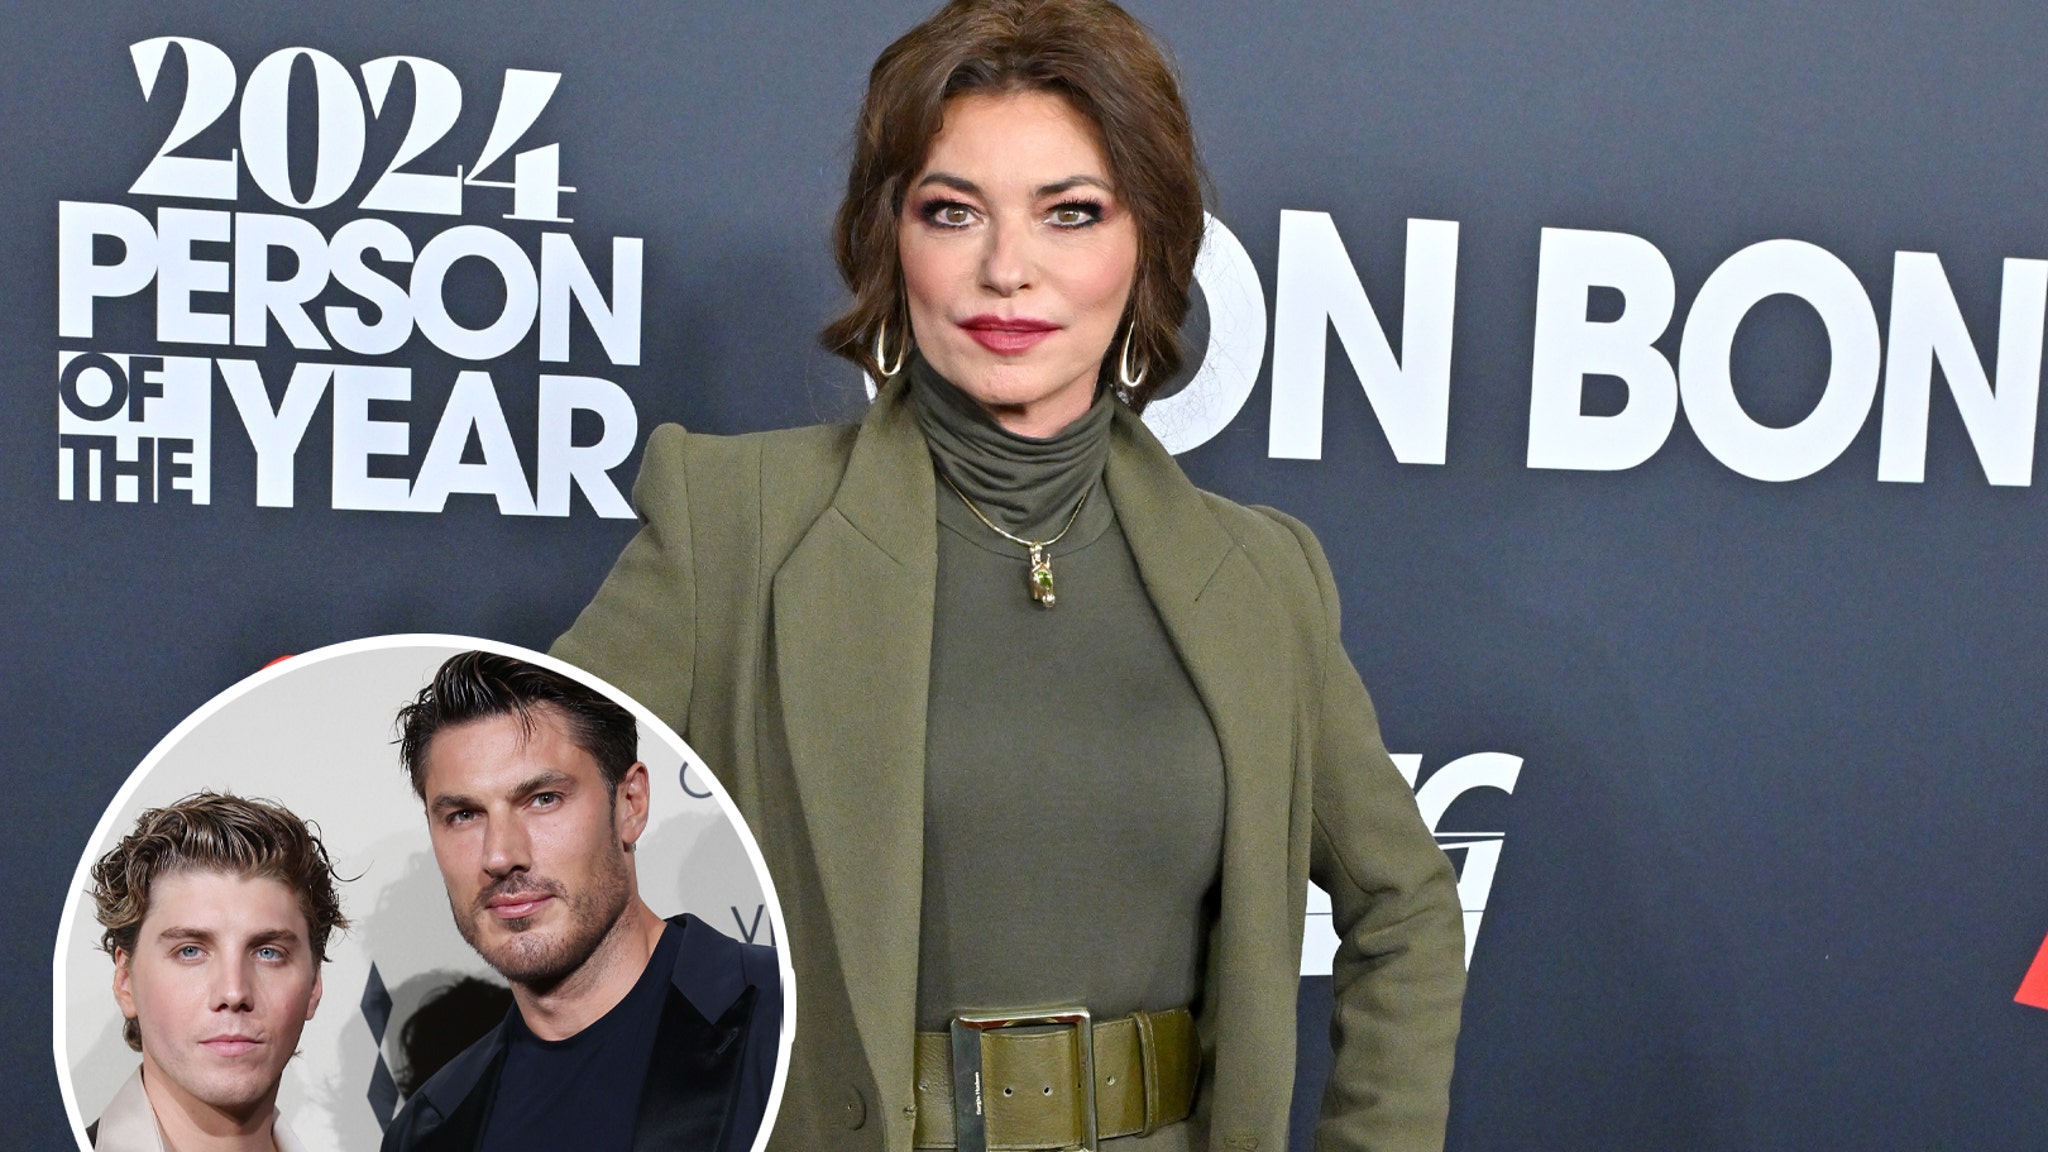 Shania Twain Has the Perfect Response to Lukas Gage's Apology for 'Wasting Her Time' With Chris Appleton Wedding